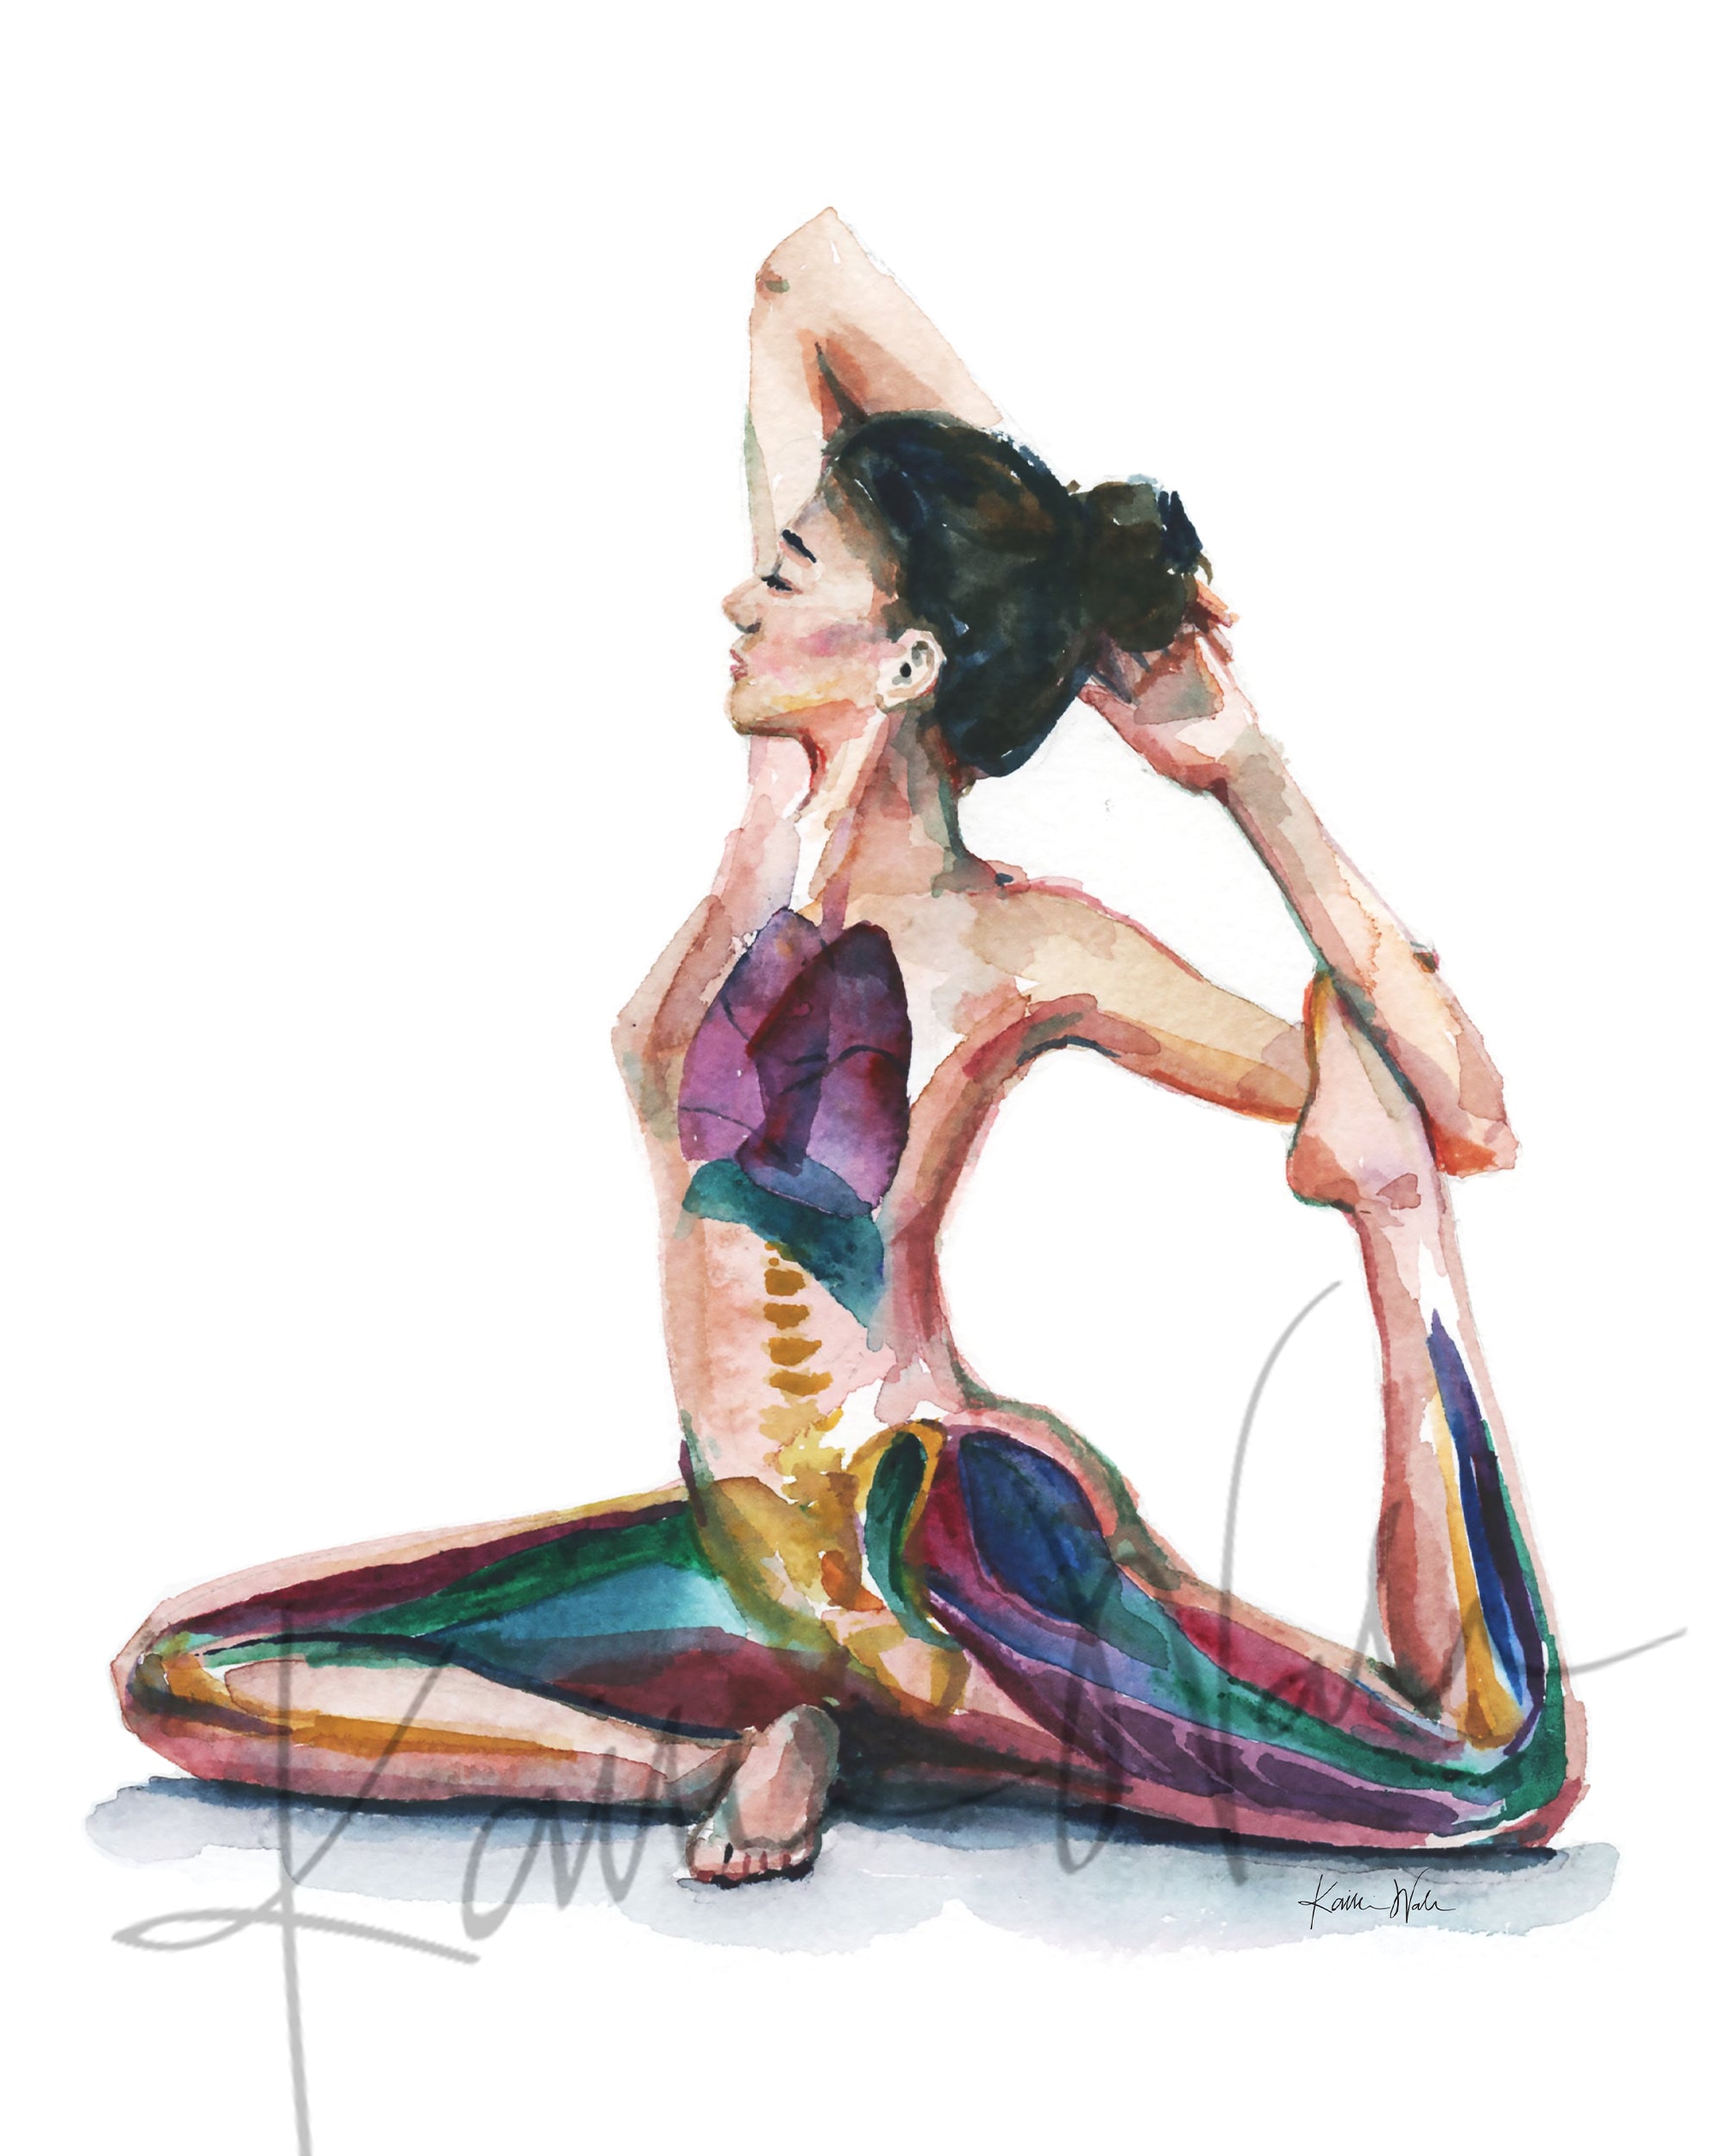 Unframed watercolor painting of one painting in a set of 3 seated yoga poses